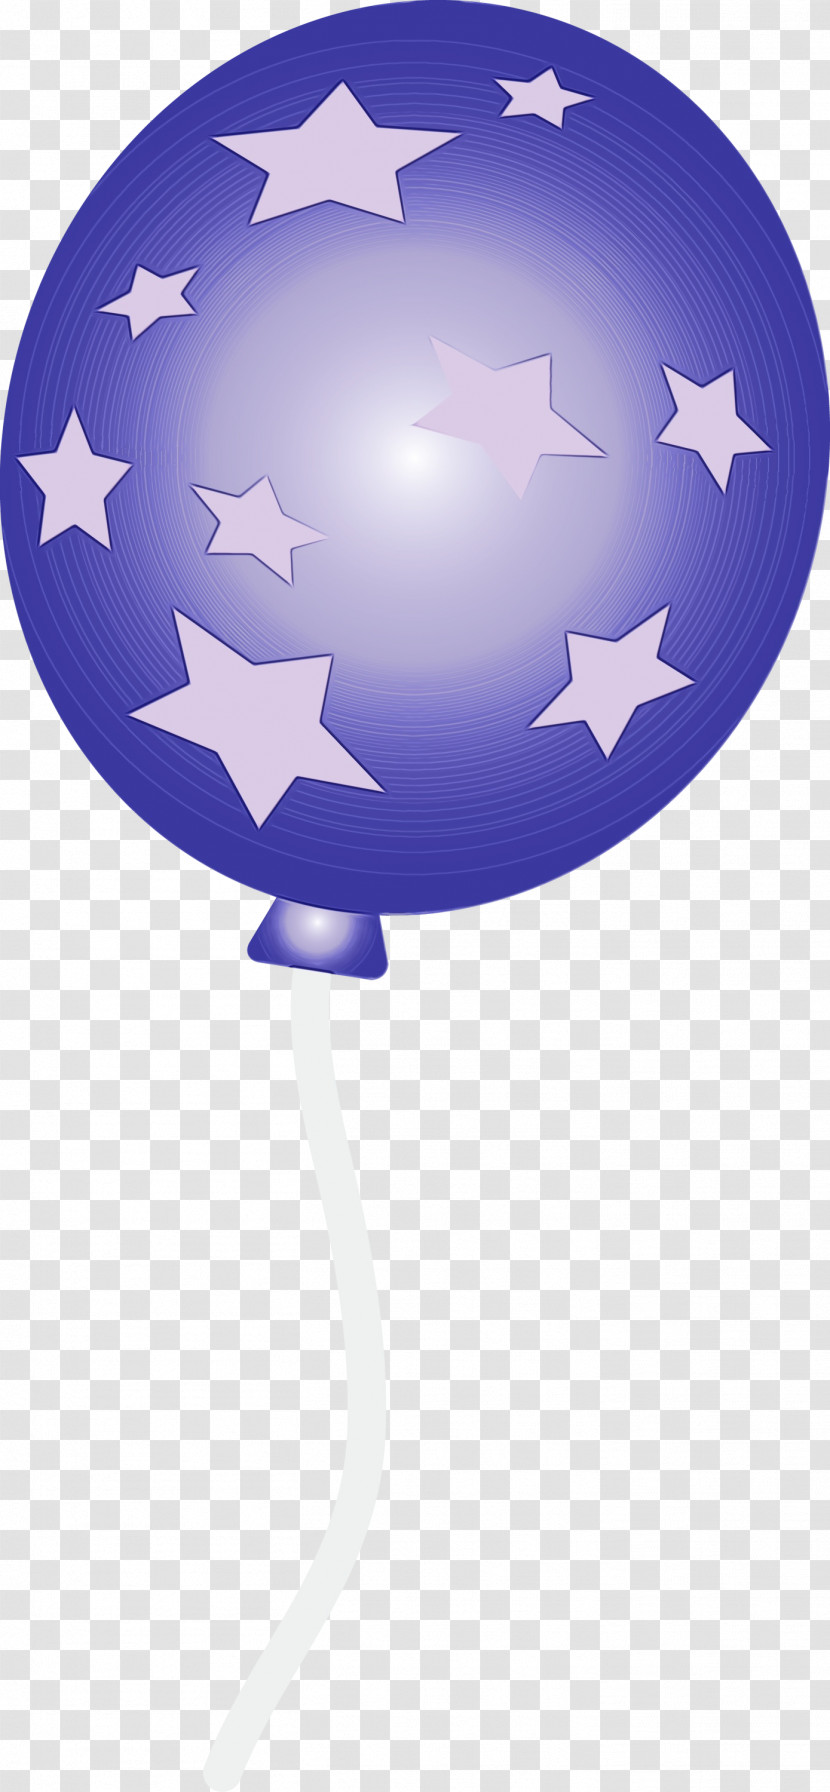 Flag Tree Electric Blue Star Transparent PNG